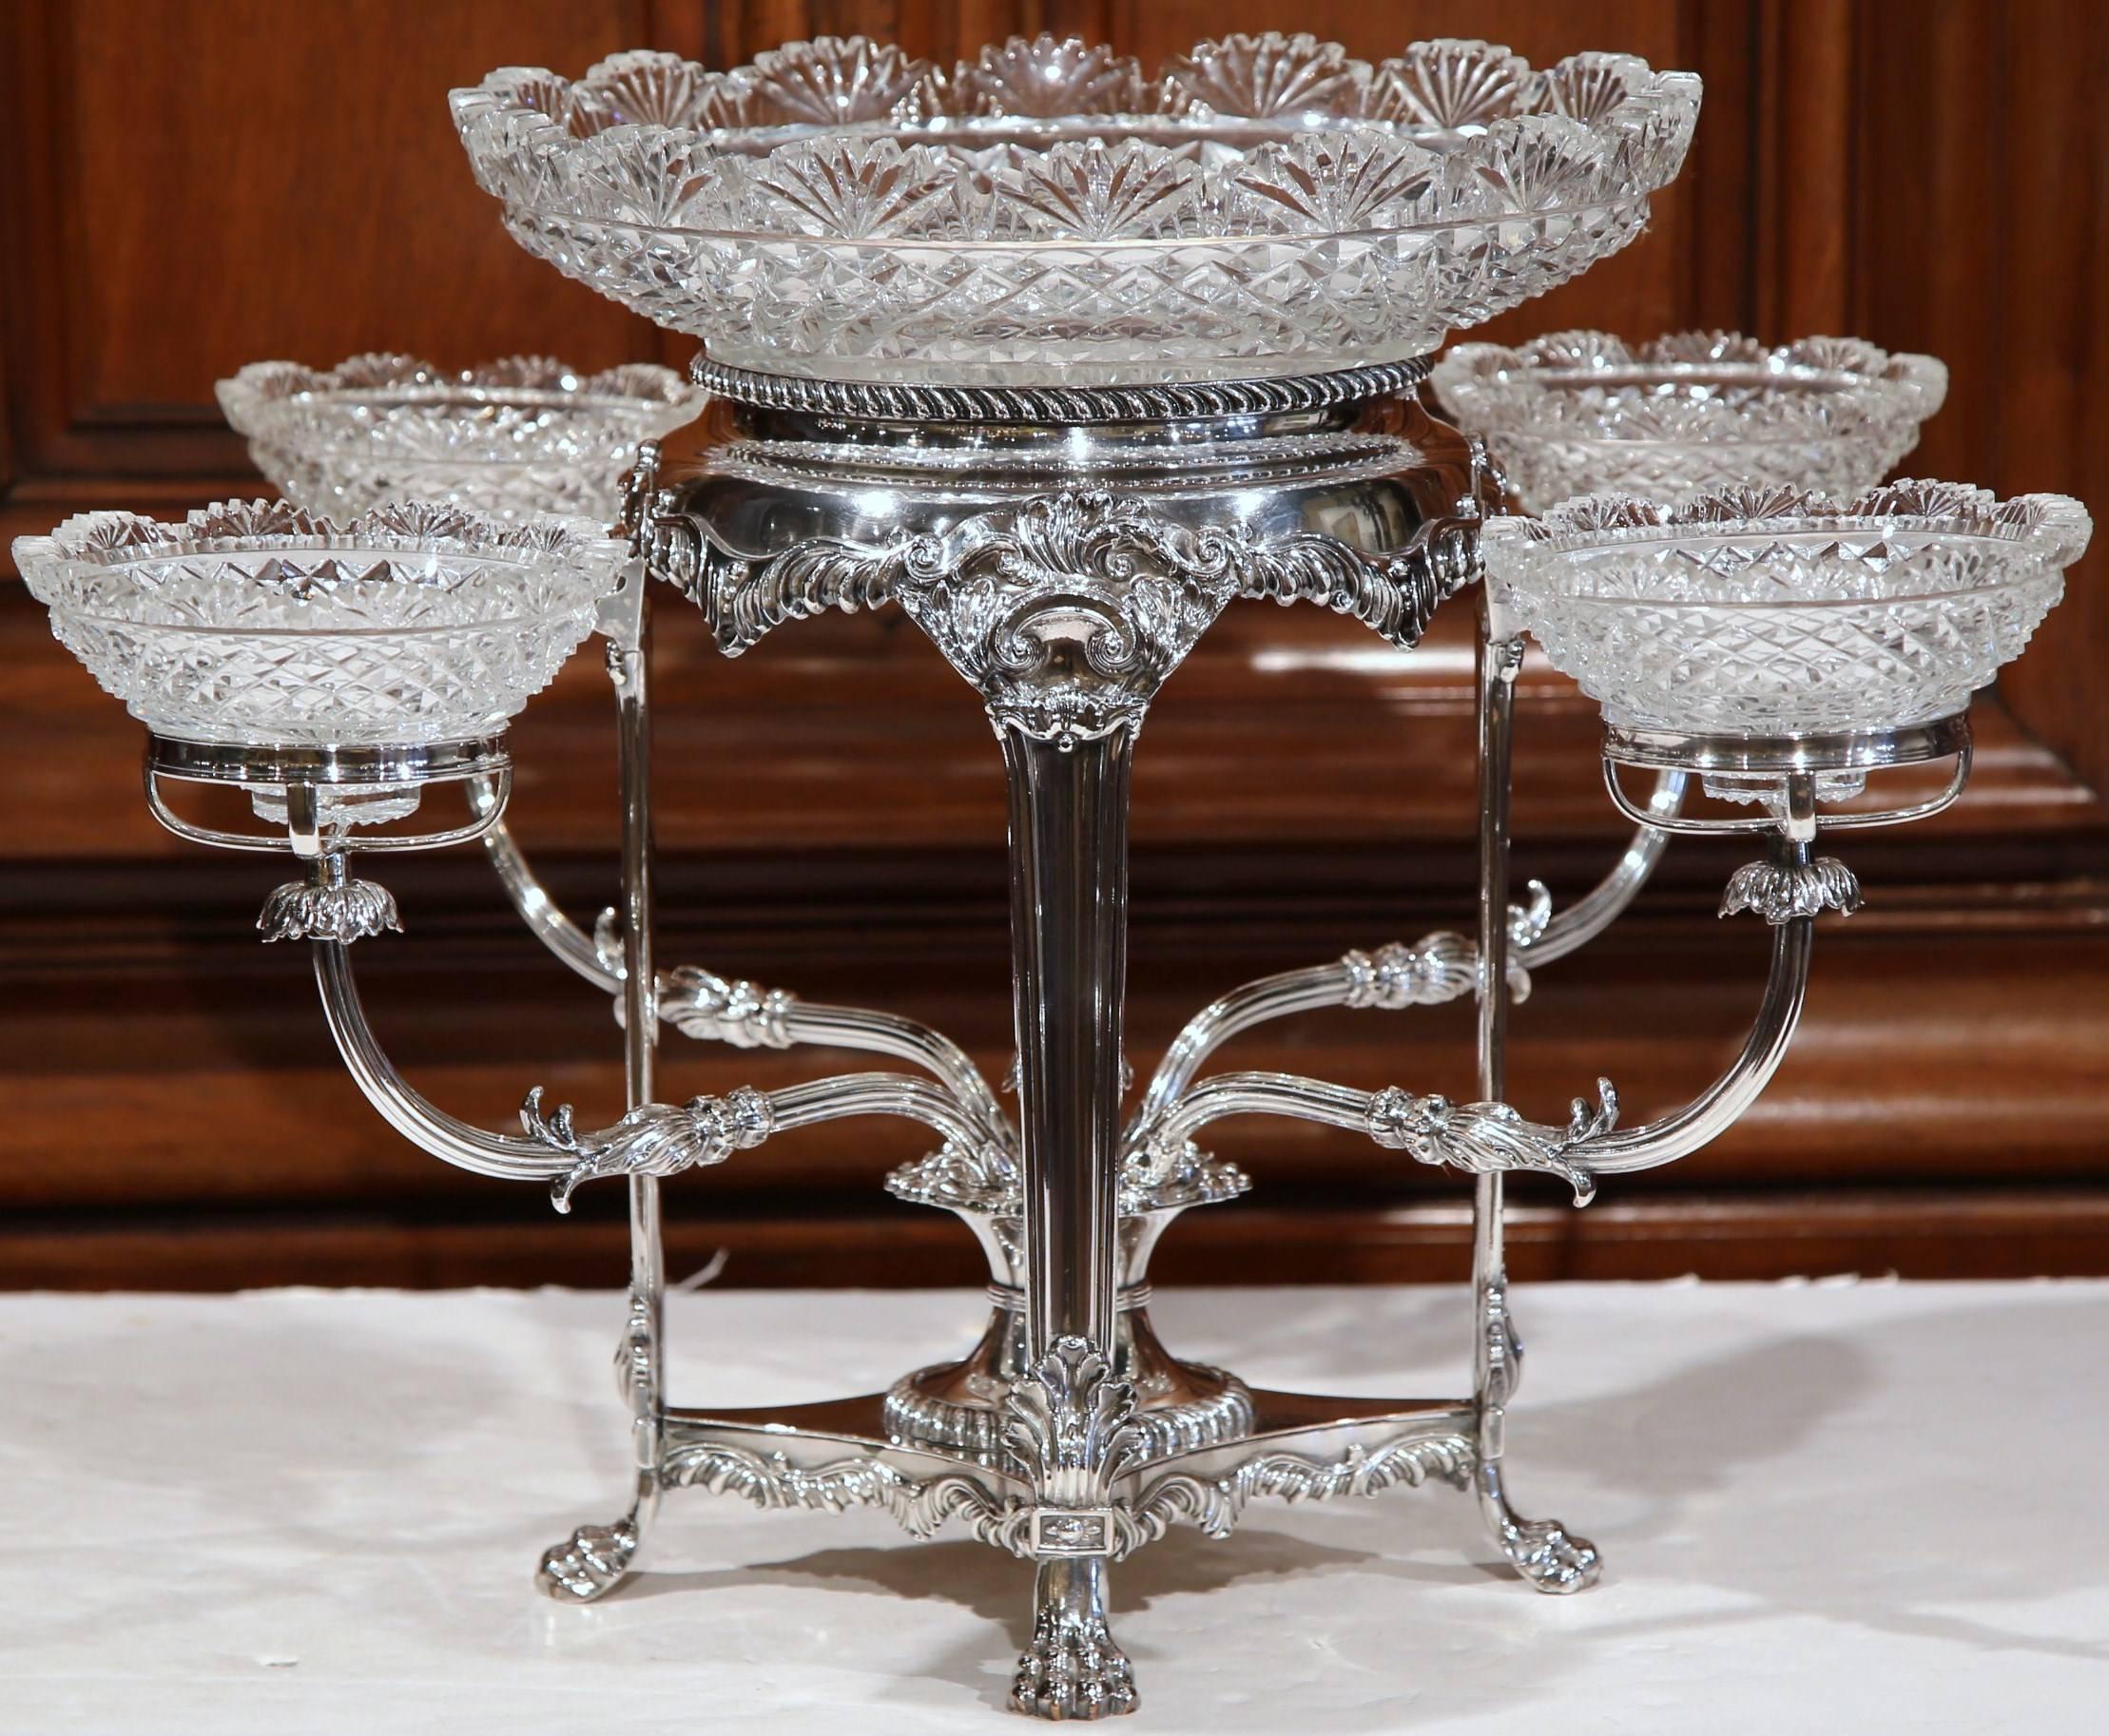 This elegant silver-plated epergne was created in England, circa 1870. The ornamental centerpiece features a large cut-glass bowl in the center with four smaller cut-glass coupes around. There are no apparent markings, and the piece is in excellent